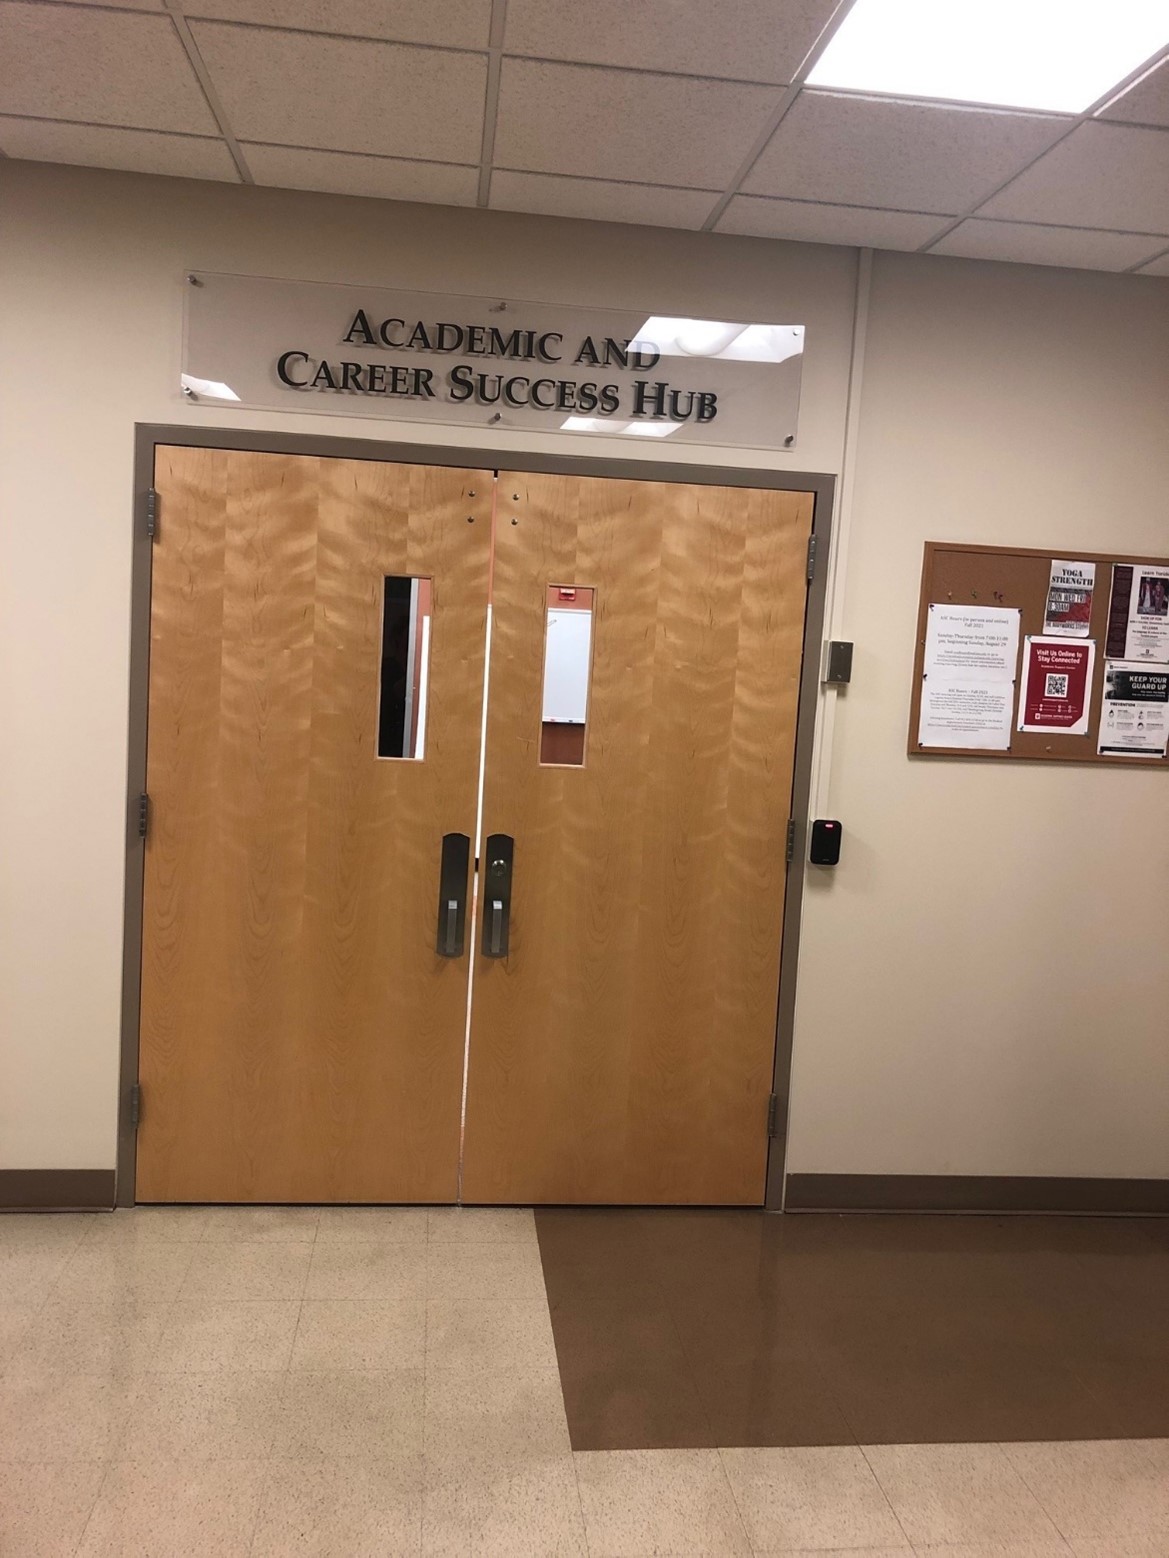 A set of wooden double doors. There is a sign above the doors labeled "Academic and Career Success Hub" and a corkboard on the wall next to the doors.